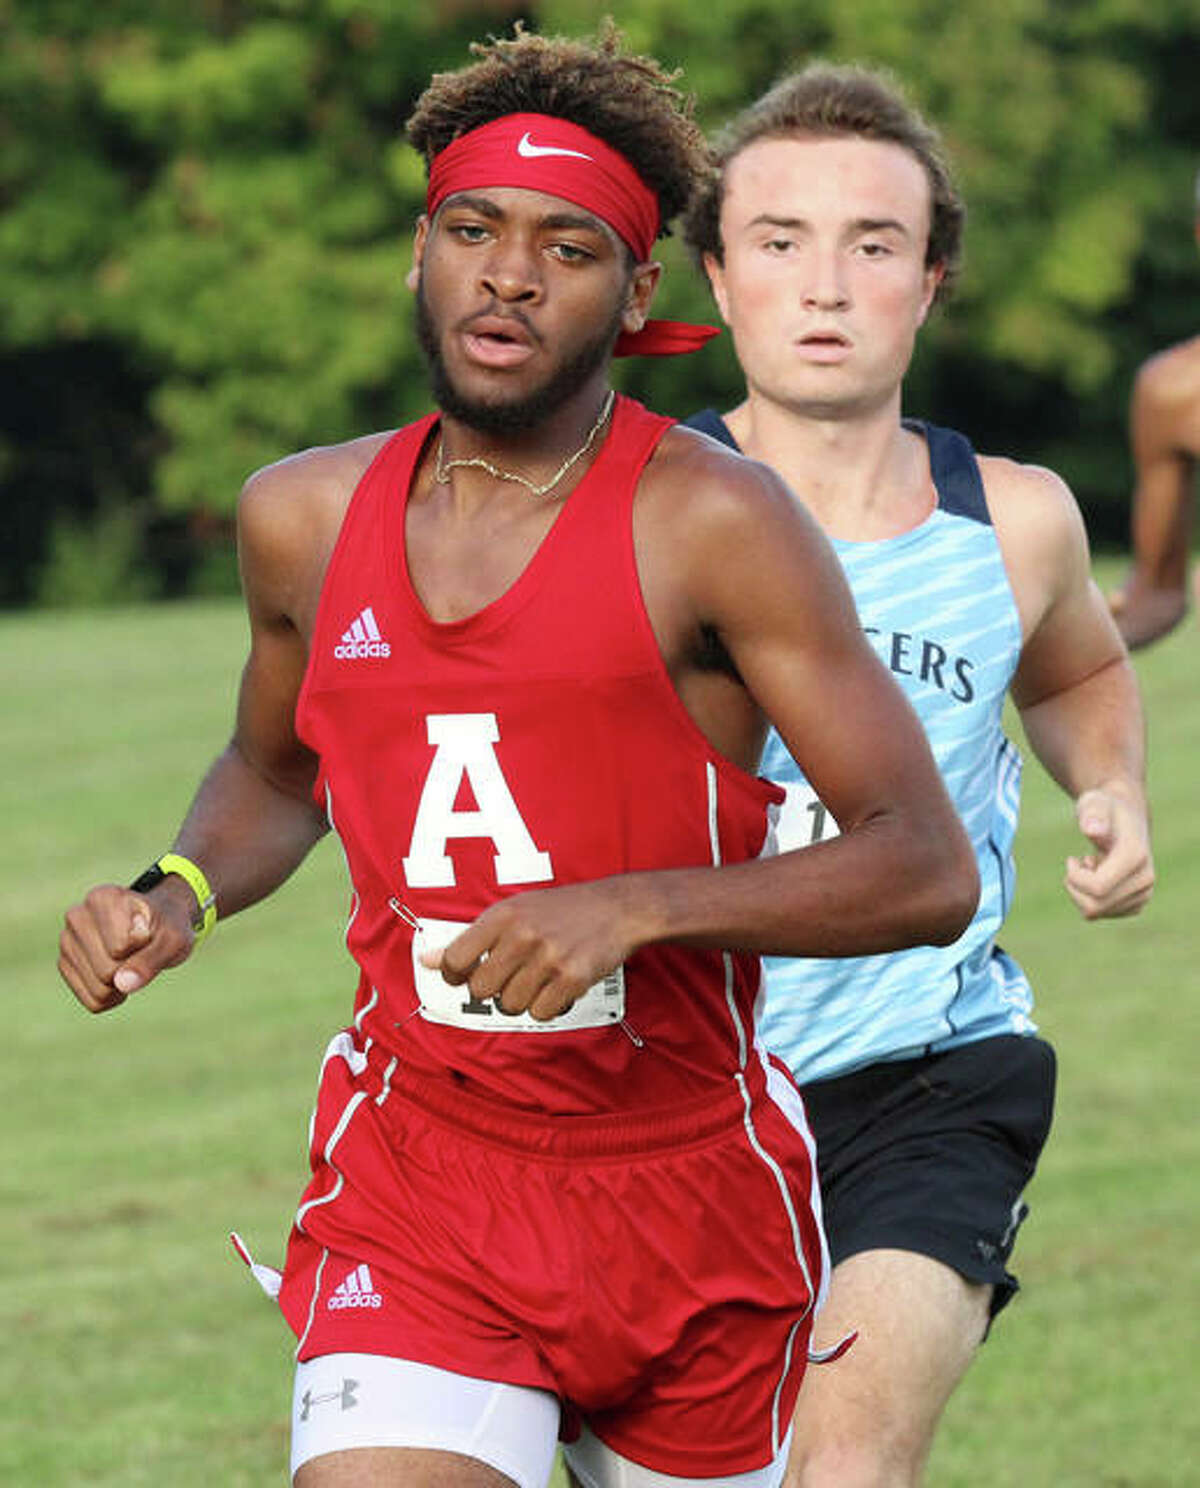 Alton’s Cassius Havis (front) leads the pack in the first mile with Belleville East’s Zach Panek right behind Wednesday at the Alton Invite at Moore Park. Panek finished fifth and Havis was sixth in the race.